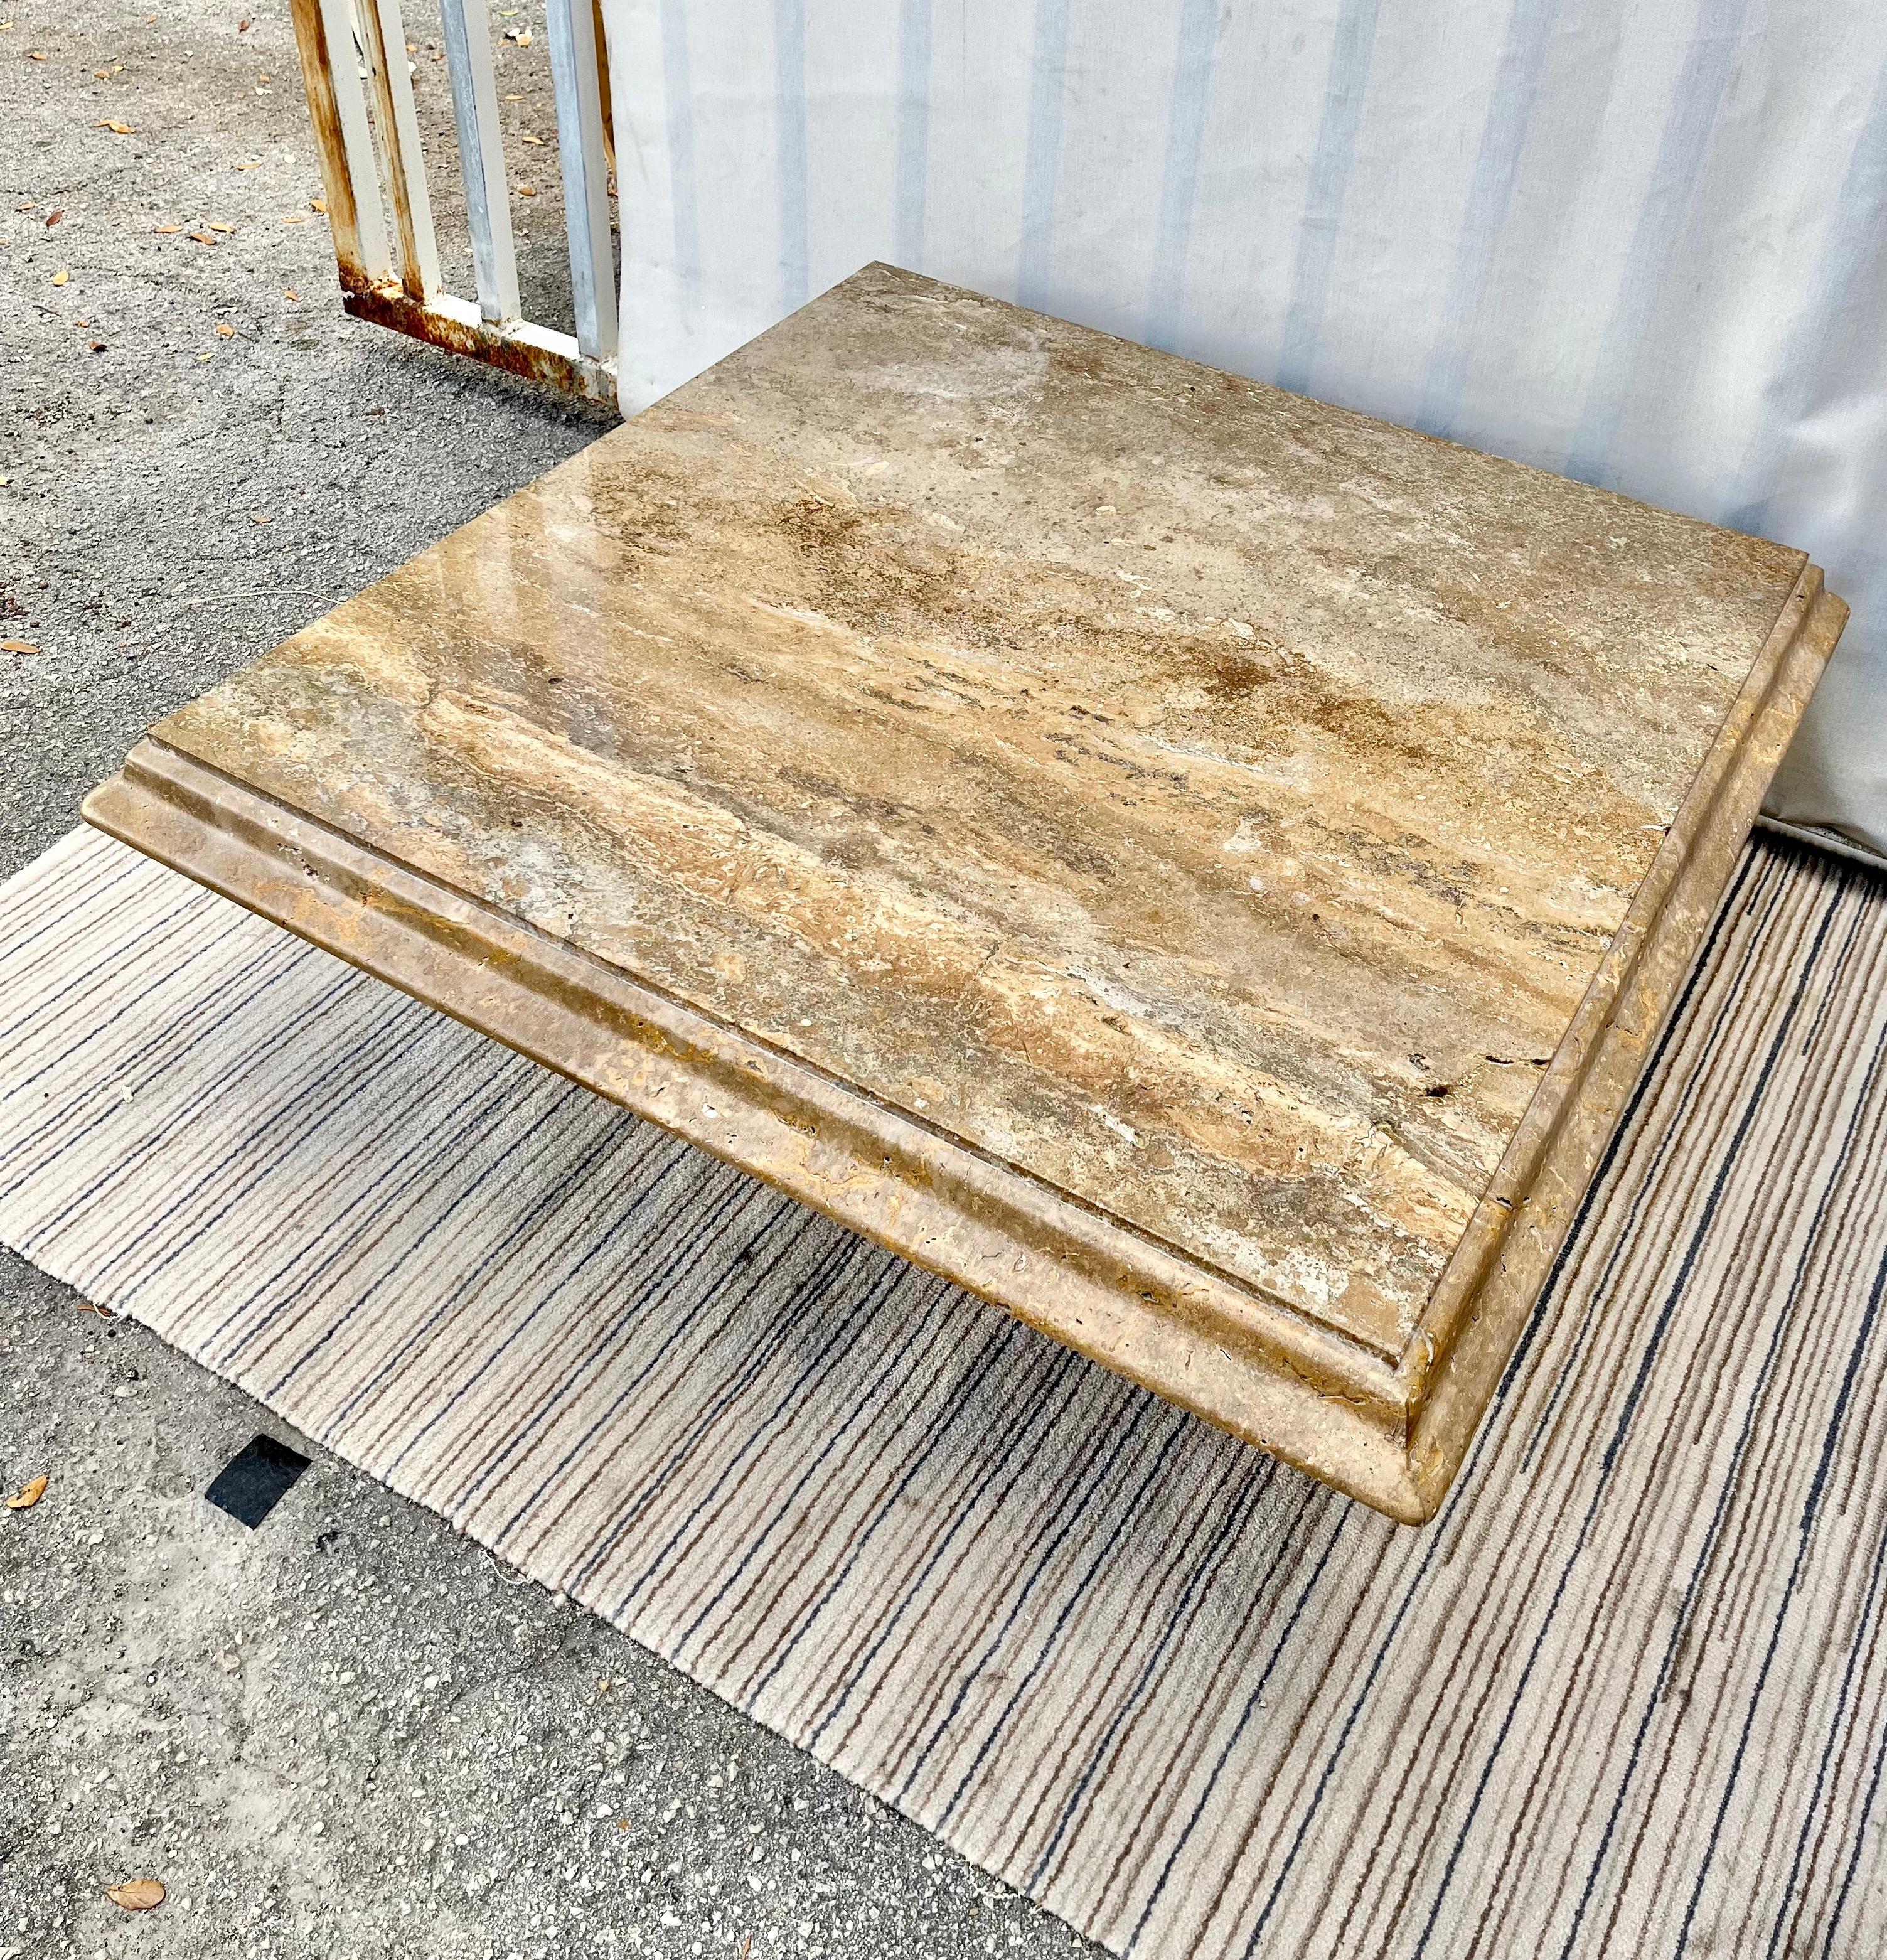 Post-Modern 1980s Postmodern Italian Travertine Coffee Table by Stone Intentional, Italy For Sale